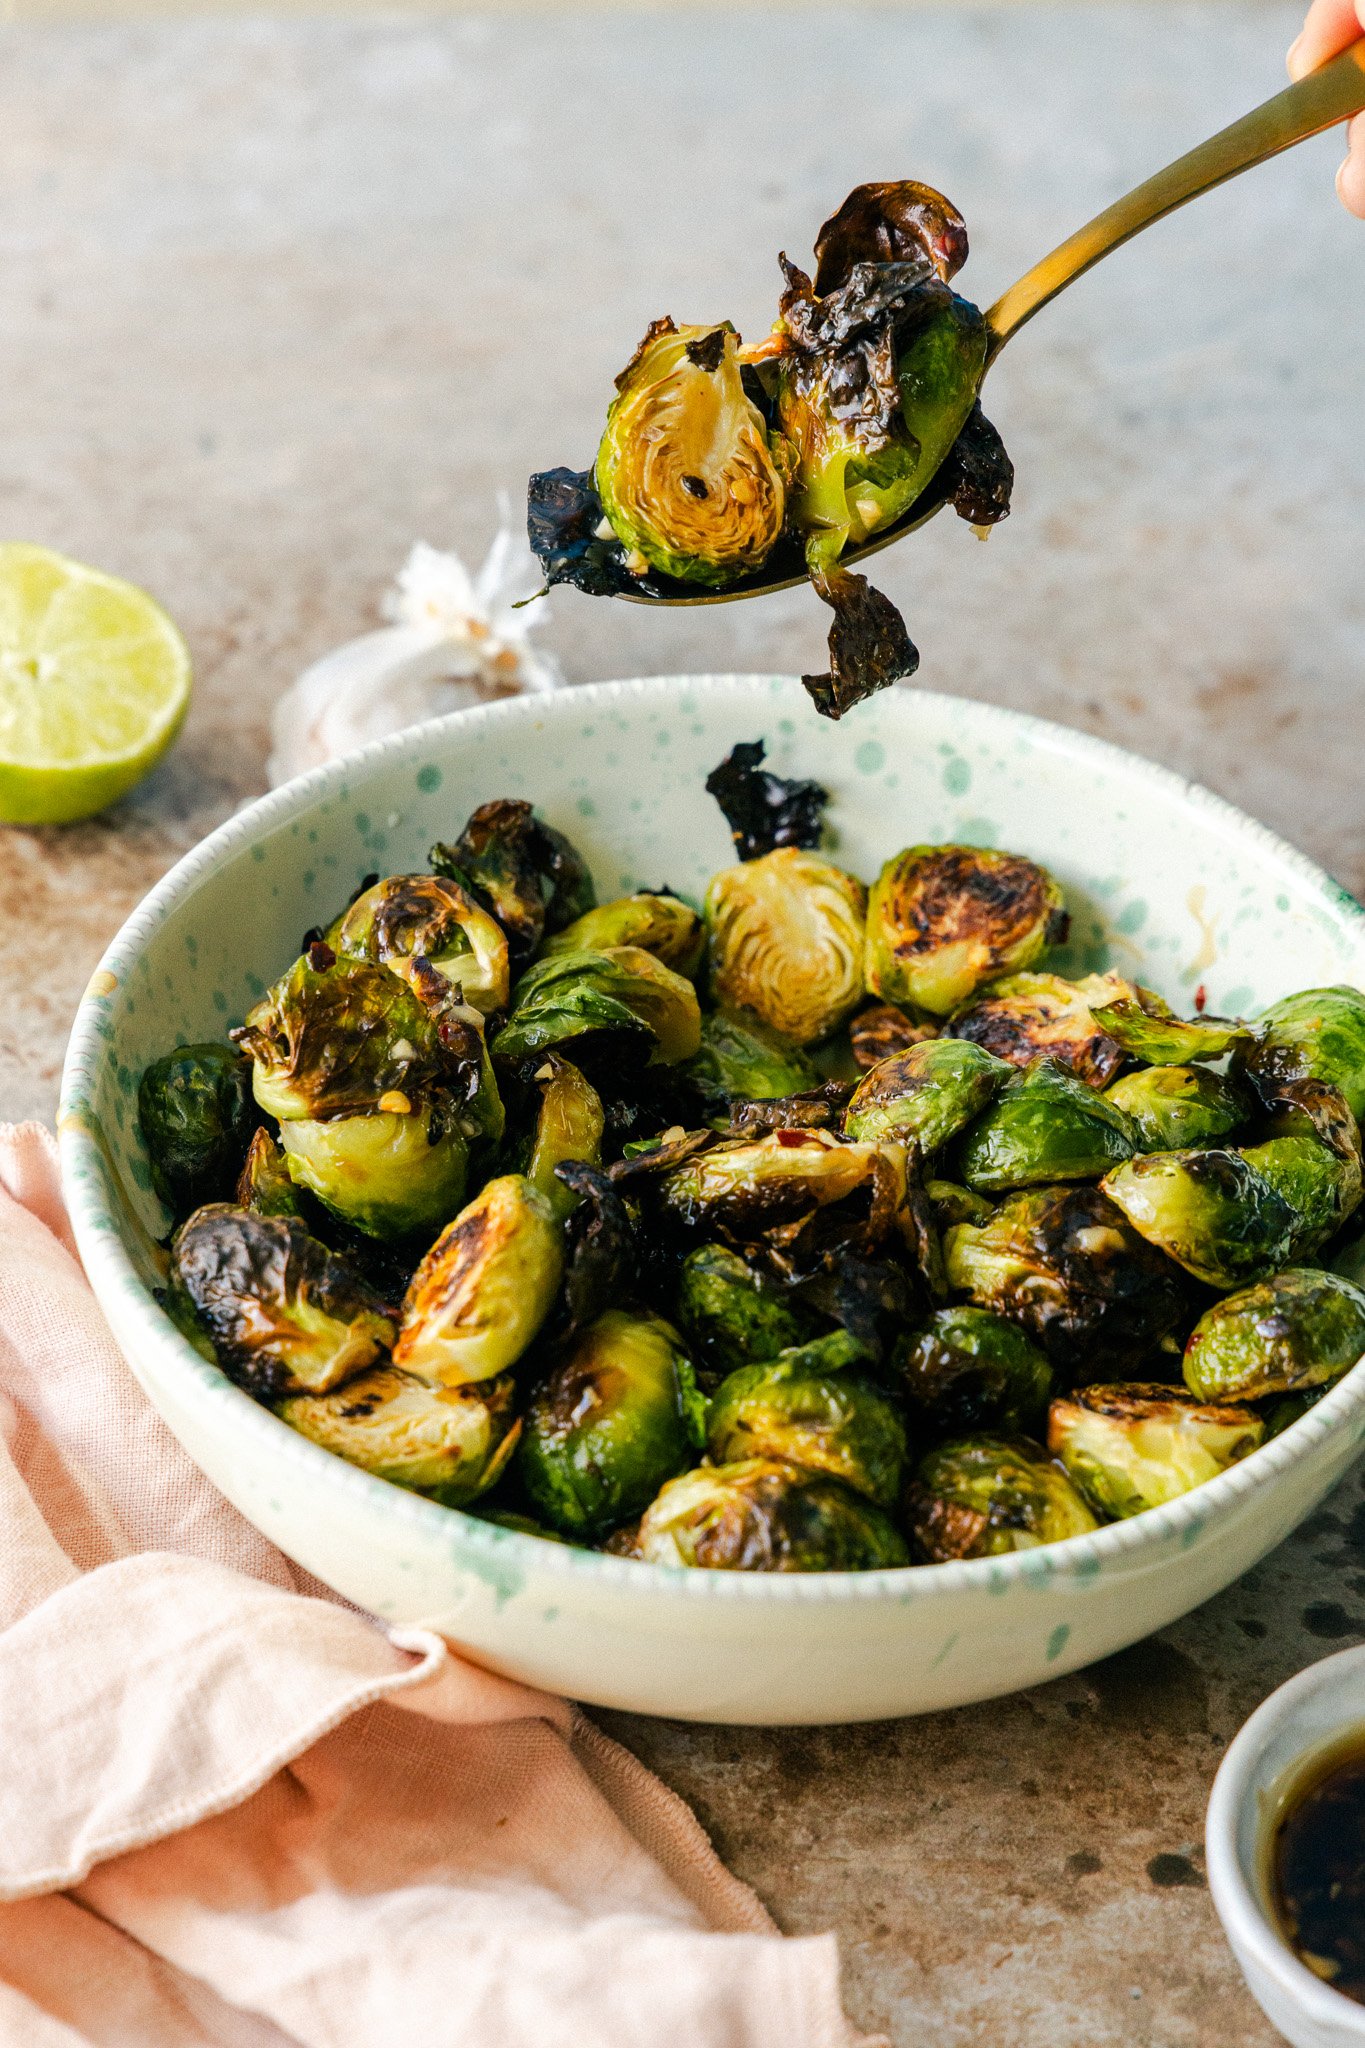 Chili Lime Glazed Brussel Sprouts